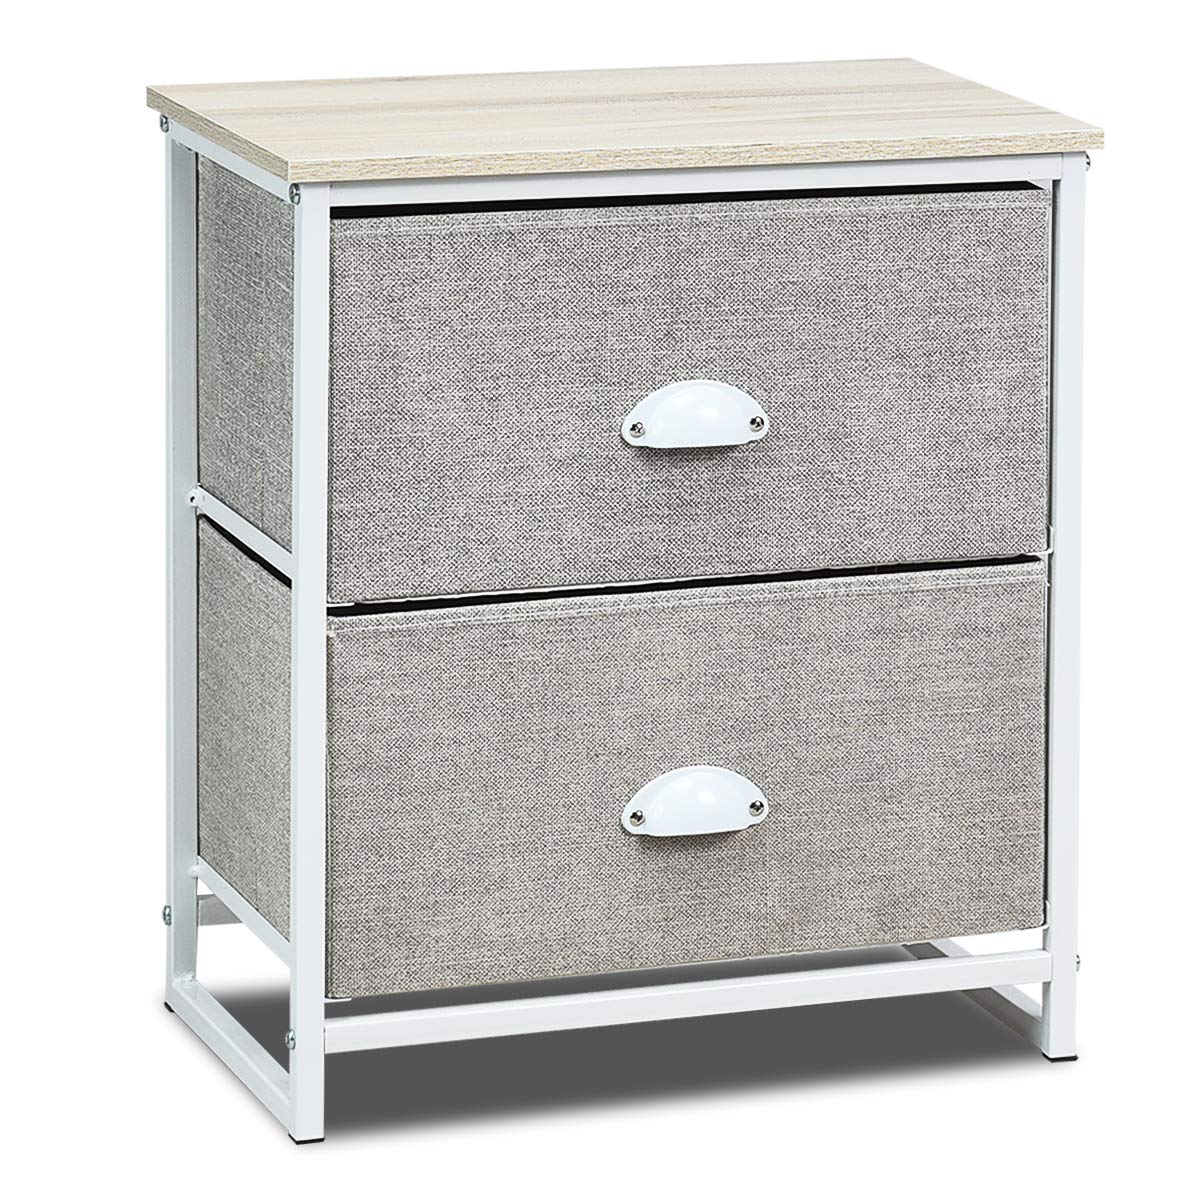 Giantex Nightstand W/Fabric Drawers, Sturdy Steel Frame and Wood Top Organizer Unit